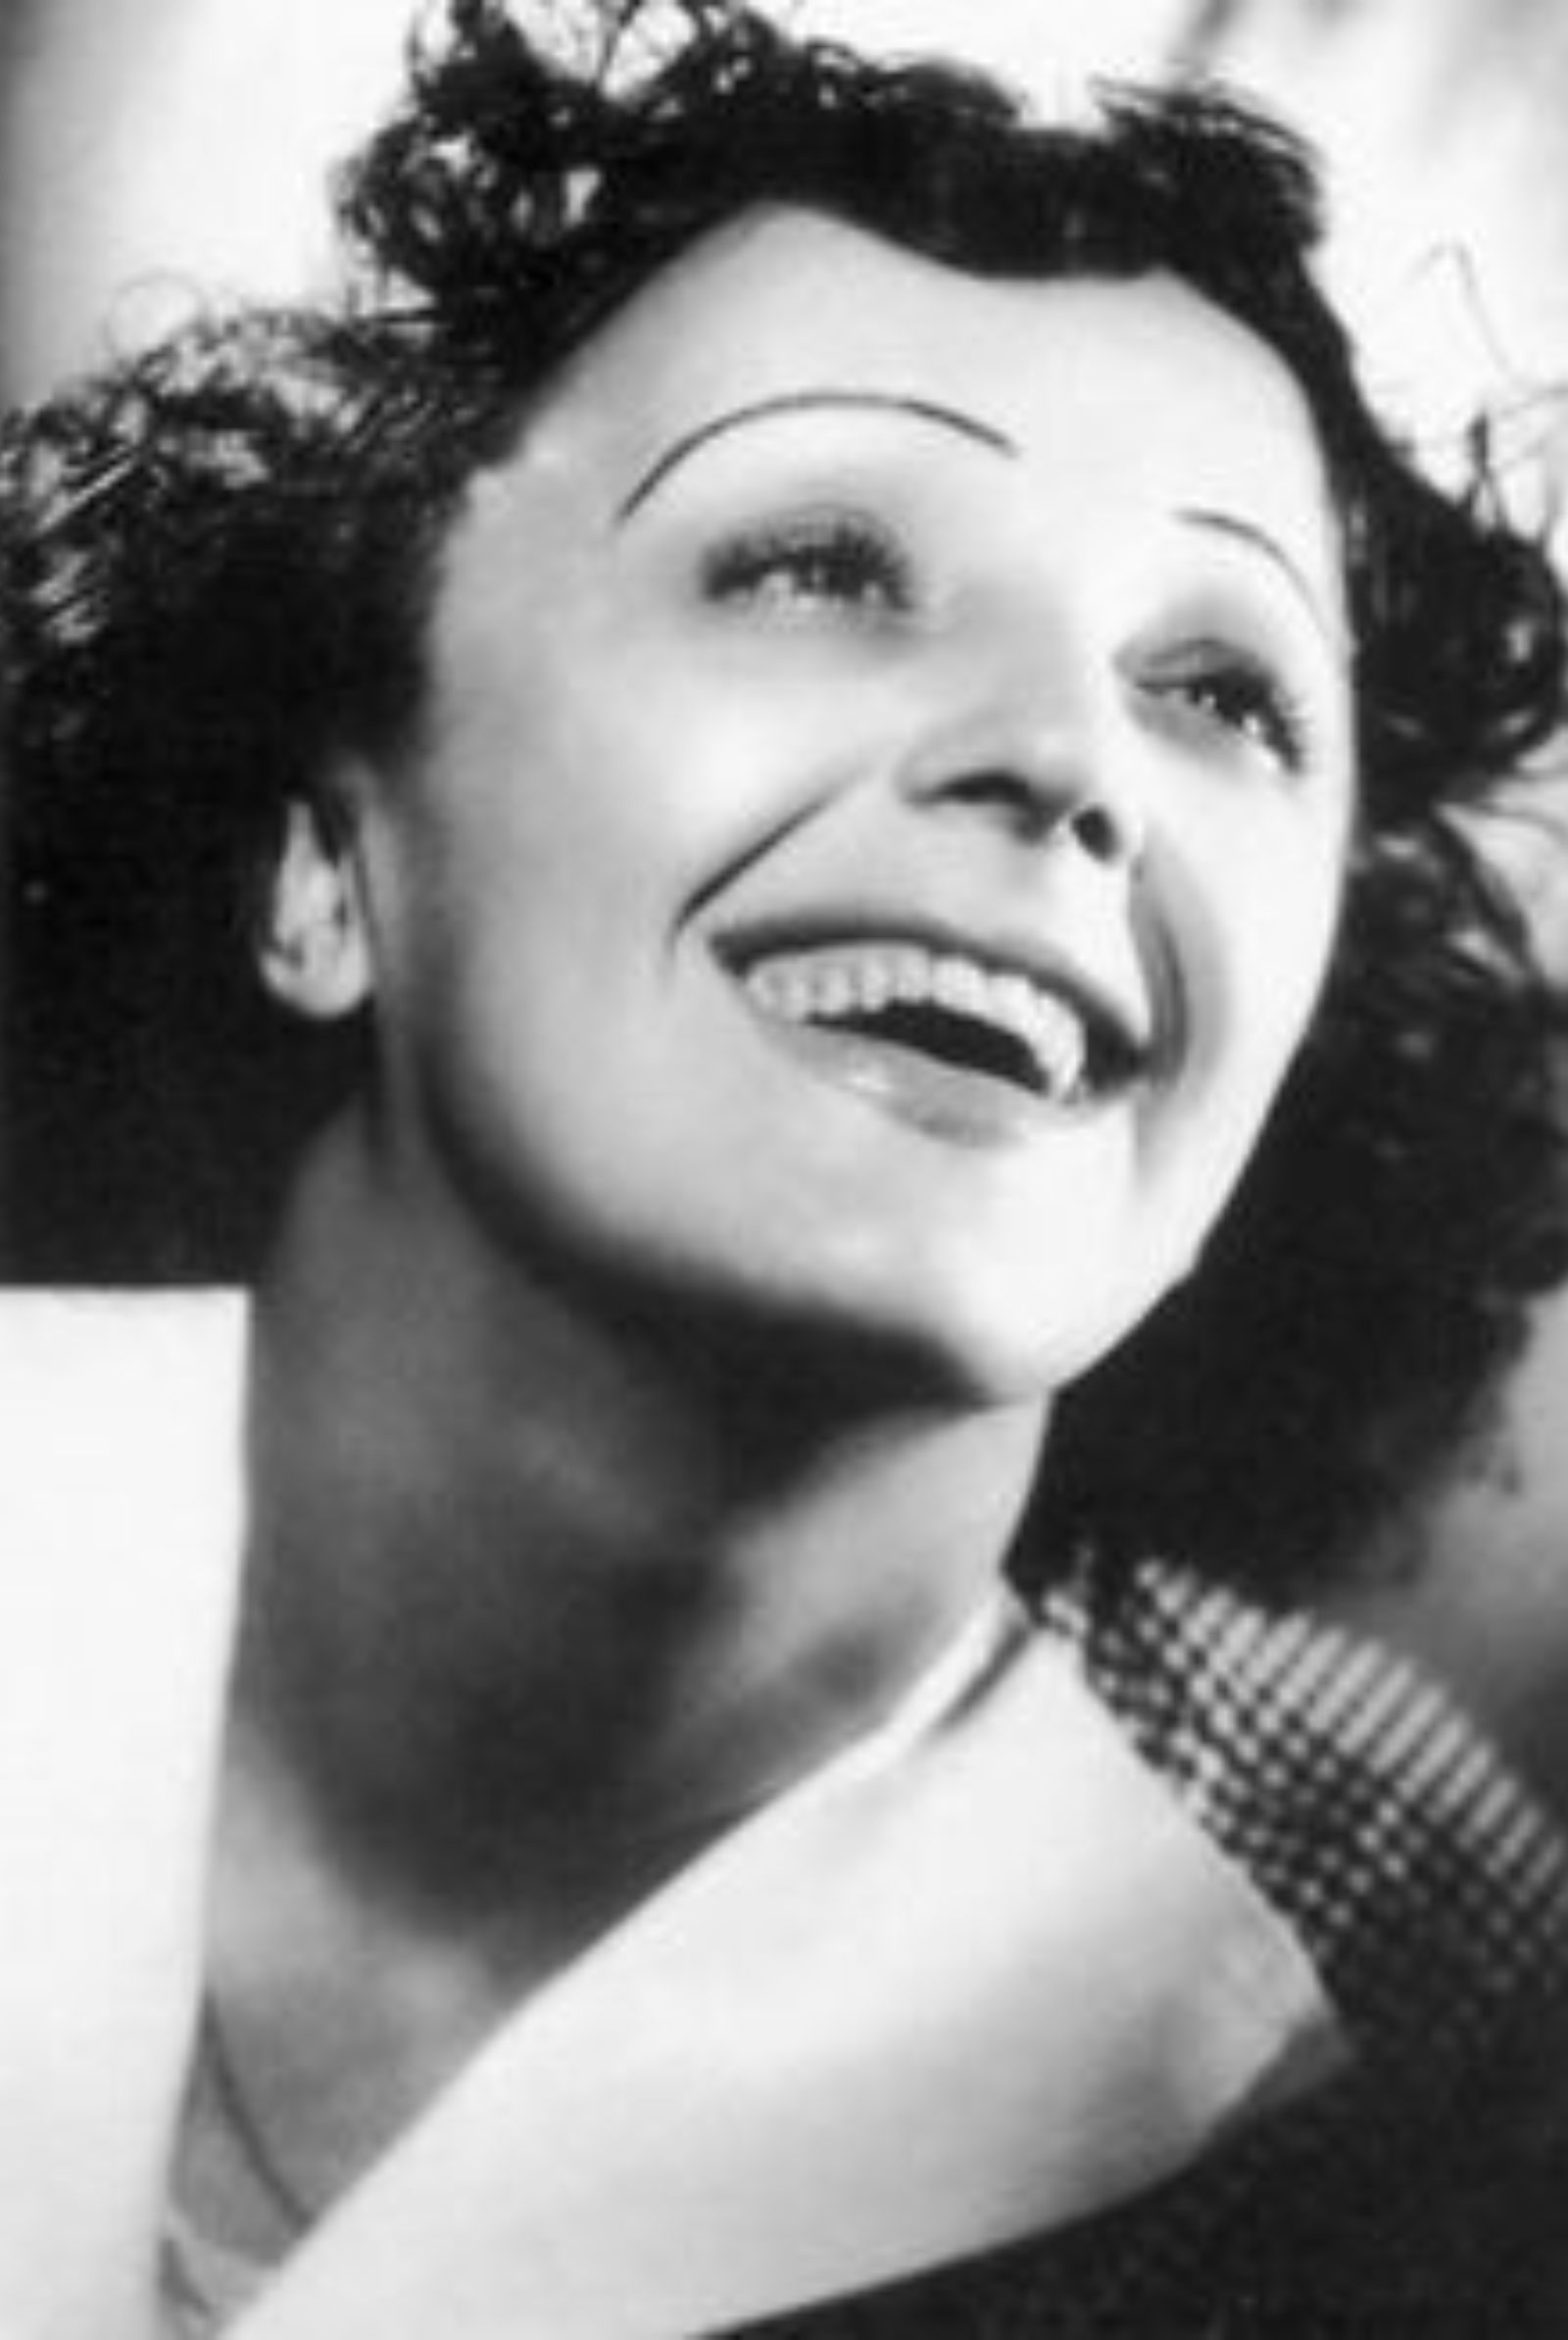 Edith Giovanna Gassion or commonly known as Edith Piaf